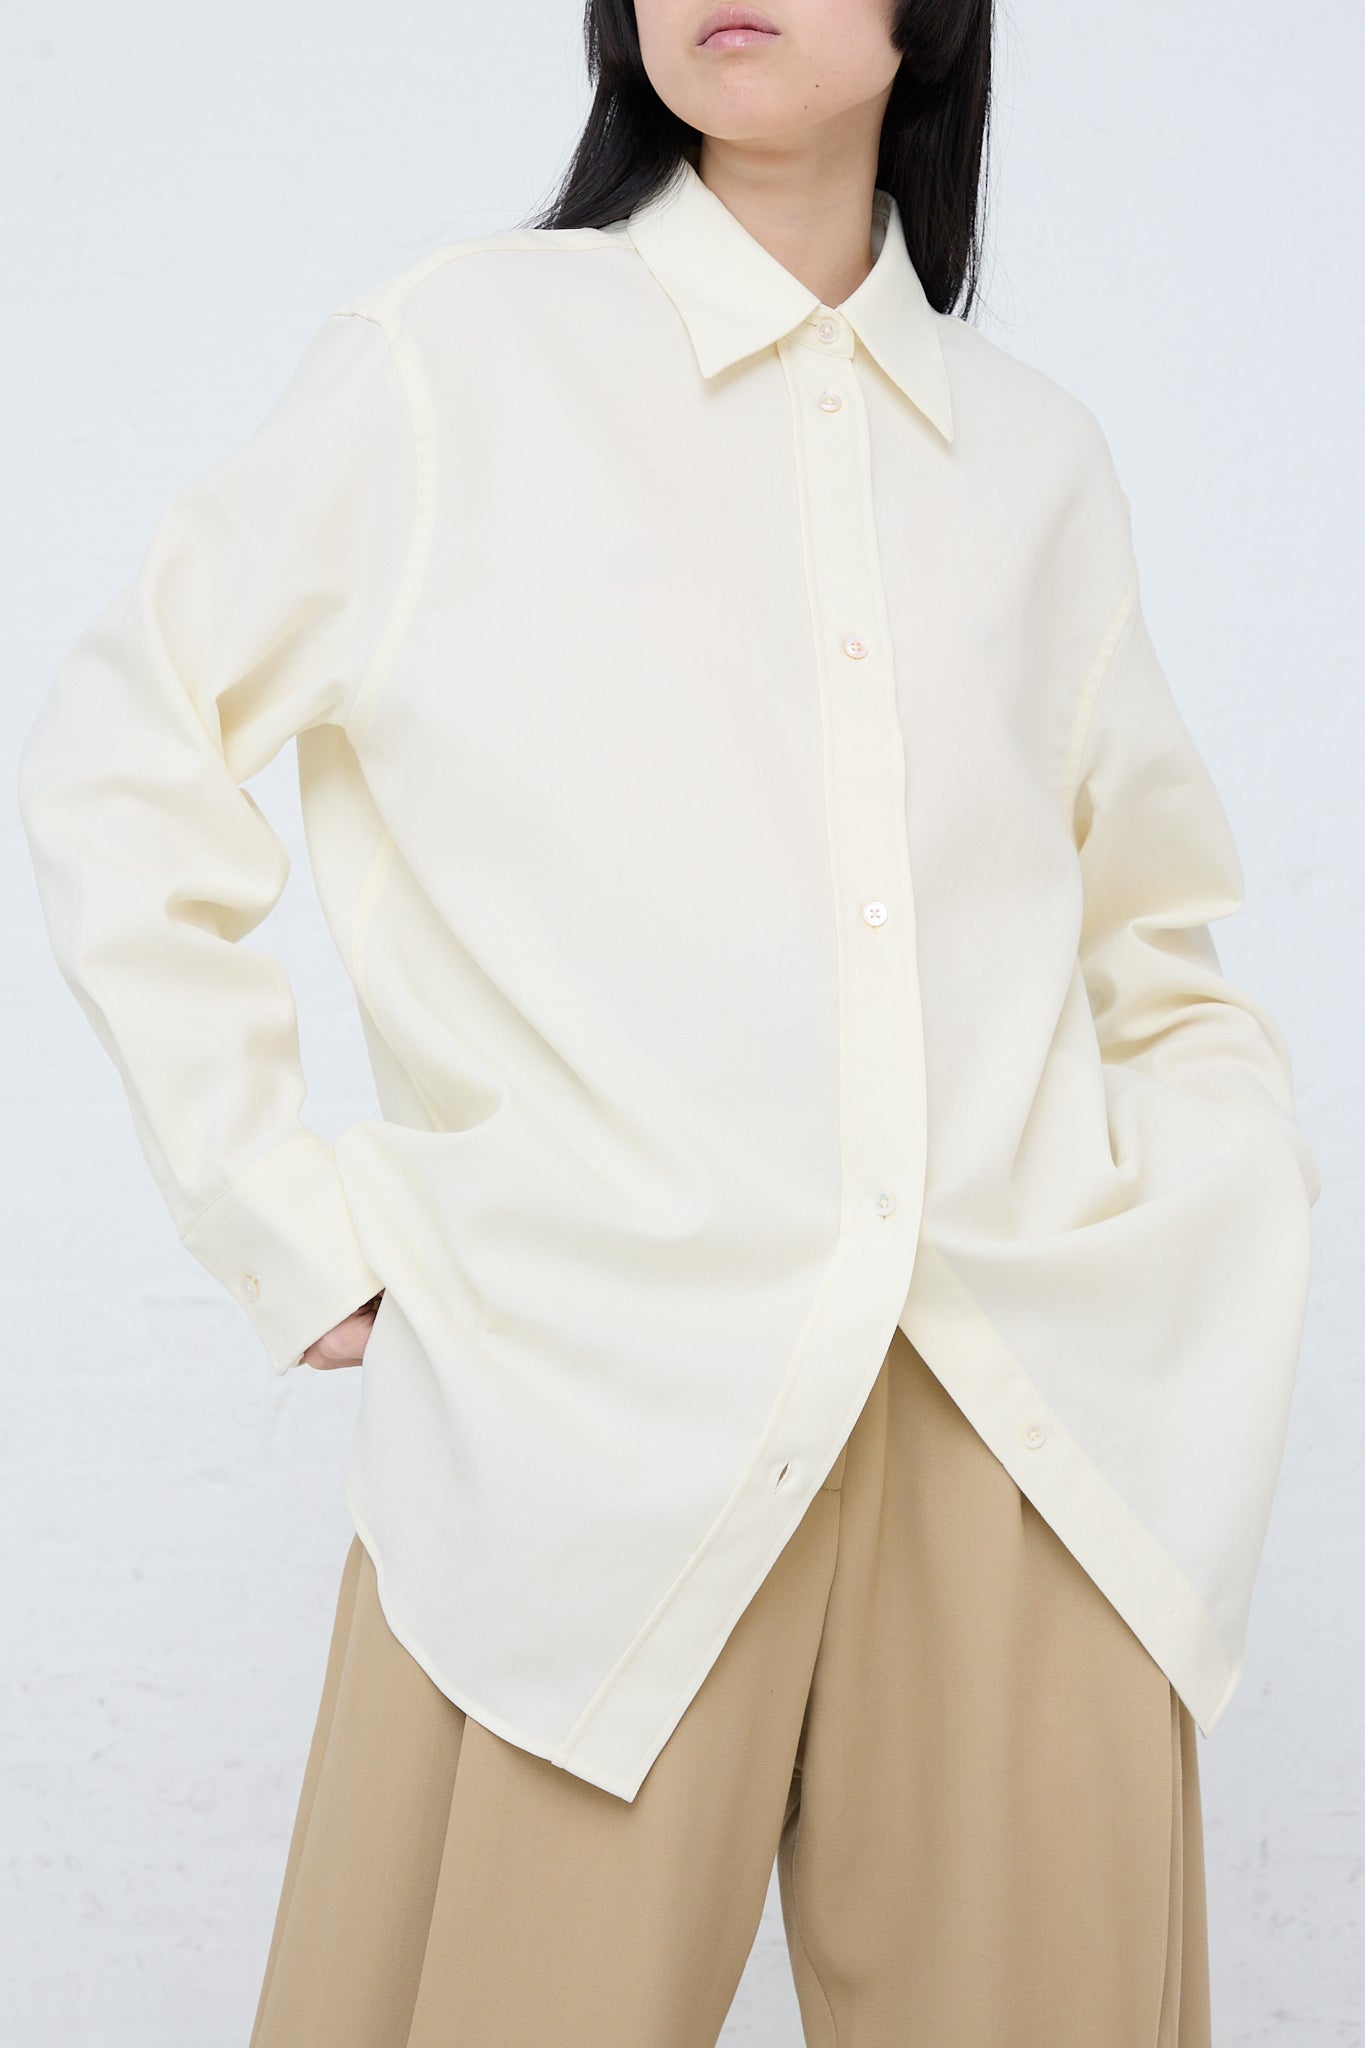 A woman wearing a Studio Nicholson Santos Overshirt in Parchment and tan pants.